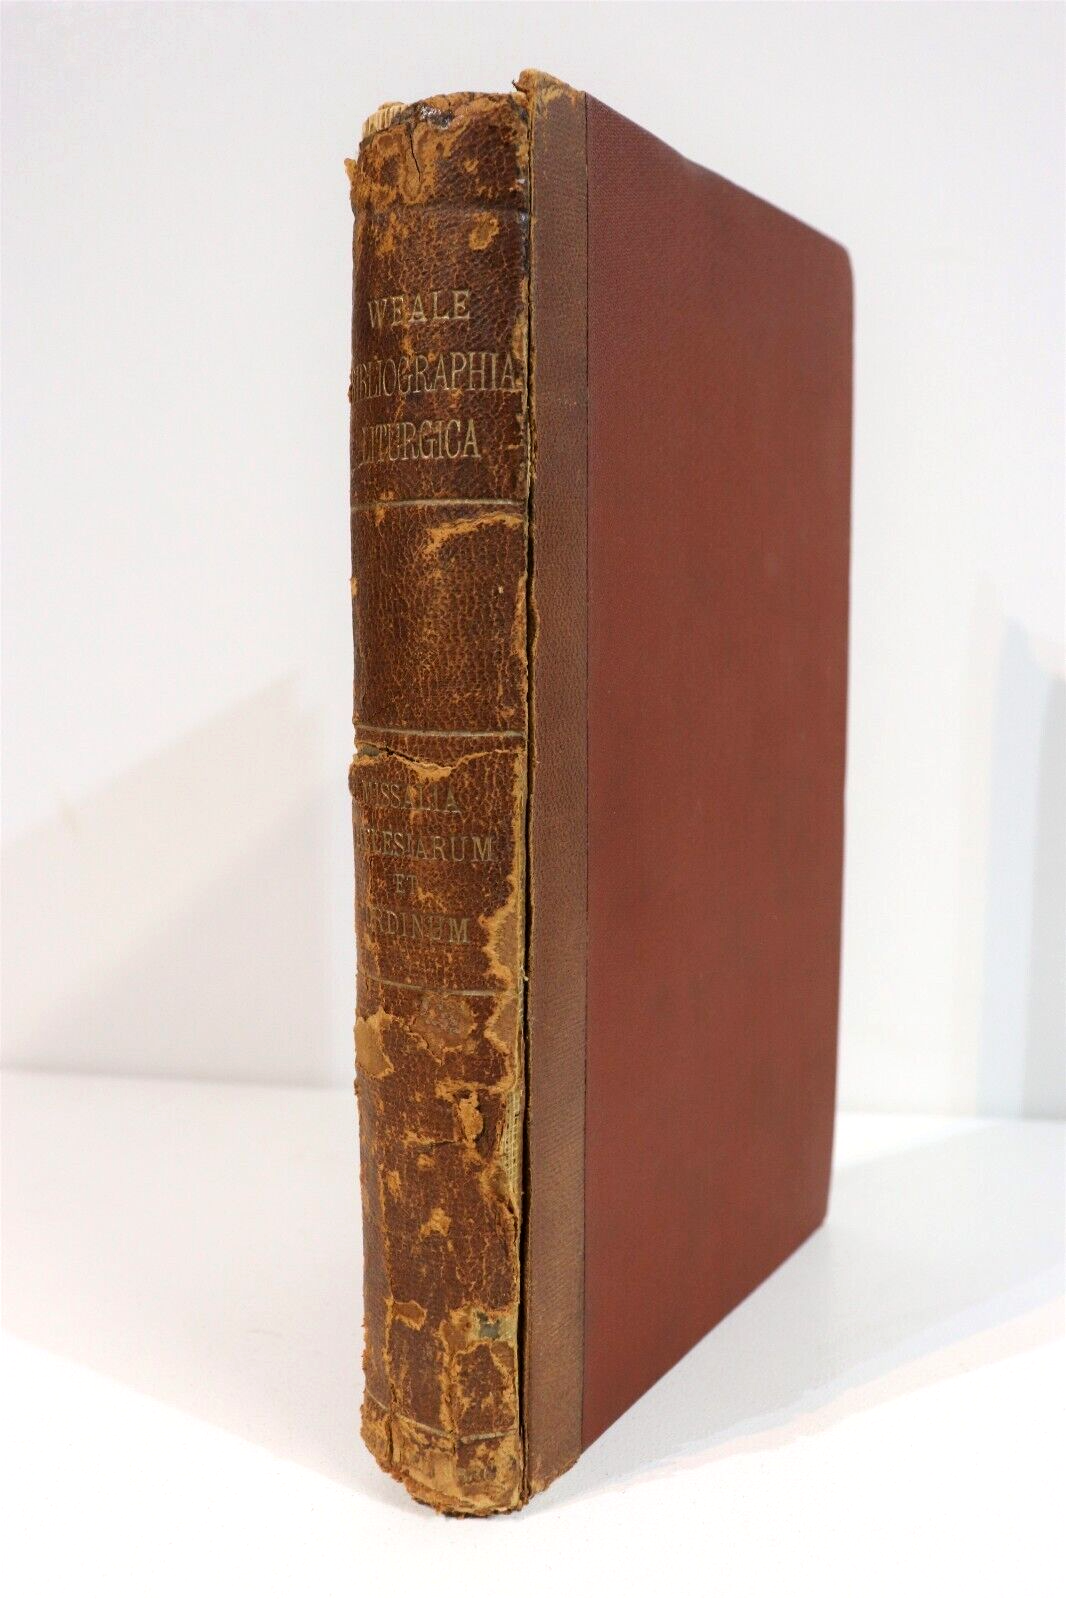 Bibliographia Liturgica by W.H.I. Weale - 1886 - Theological Reference Book